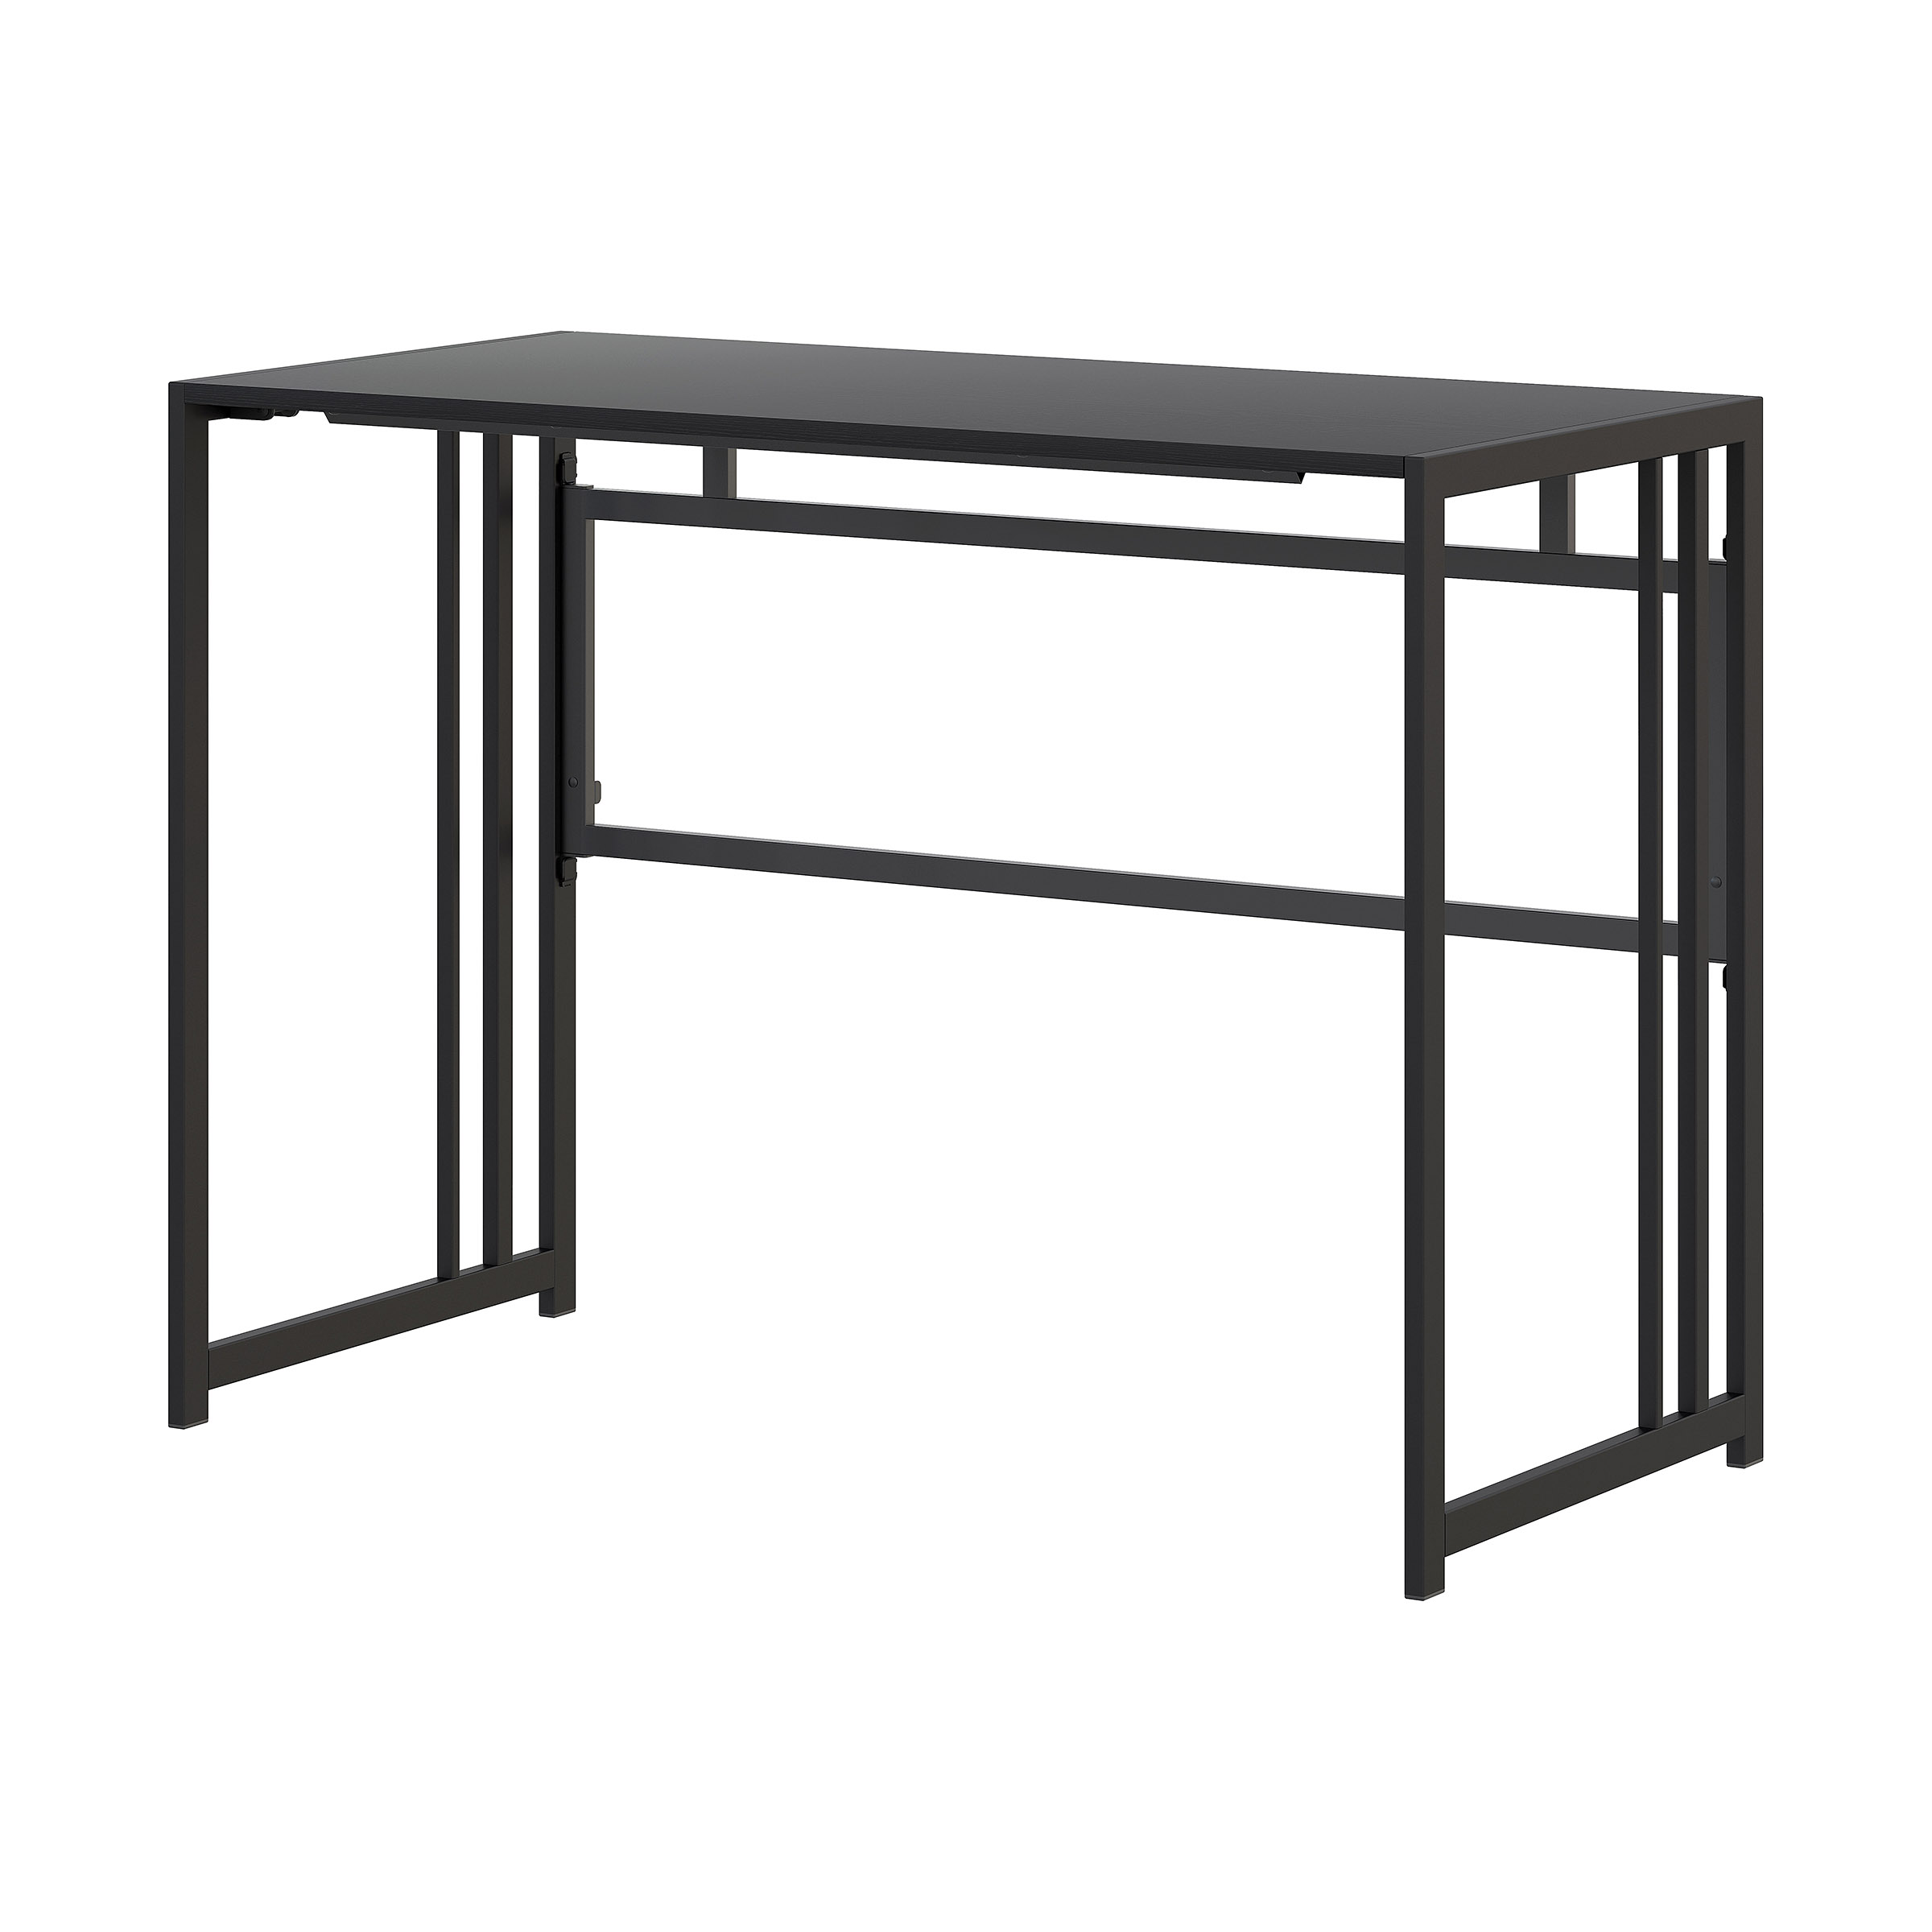 Gezen Folding Desk Writing Computer Desk for Home Office, No-Assembly Study  Office Desk Foldable Console Table for Small Spaces, Black